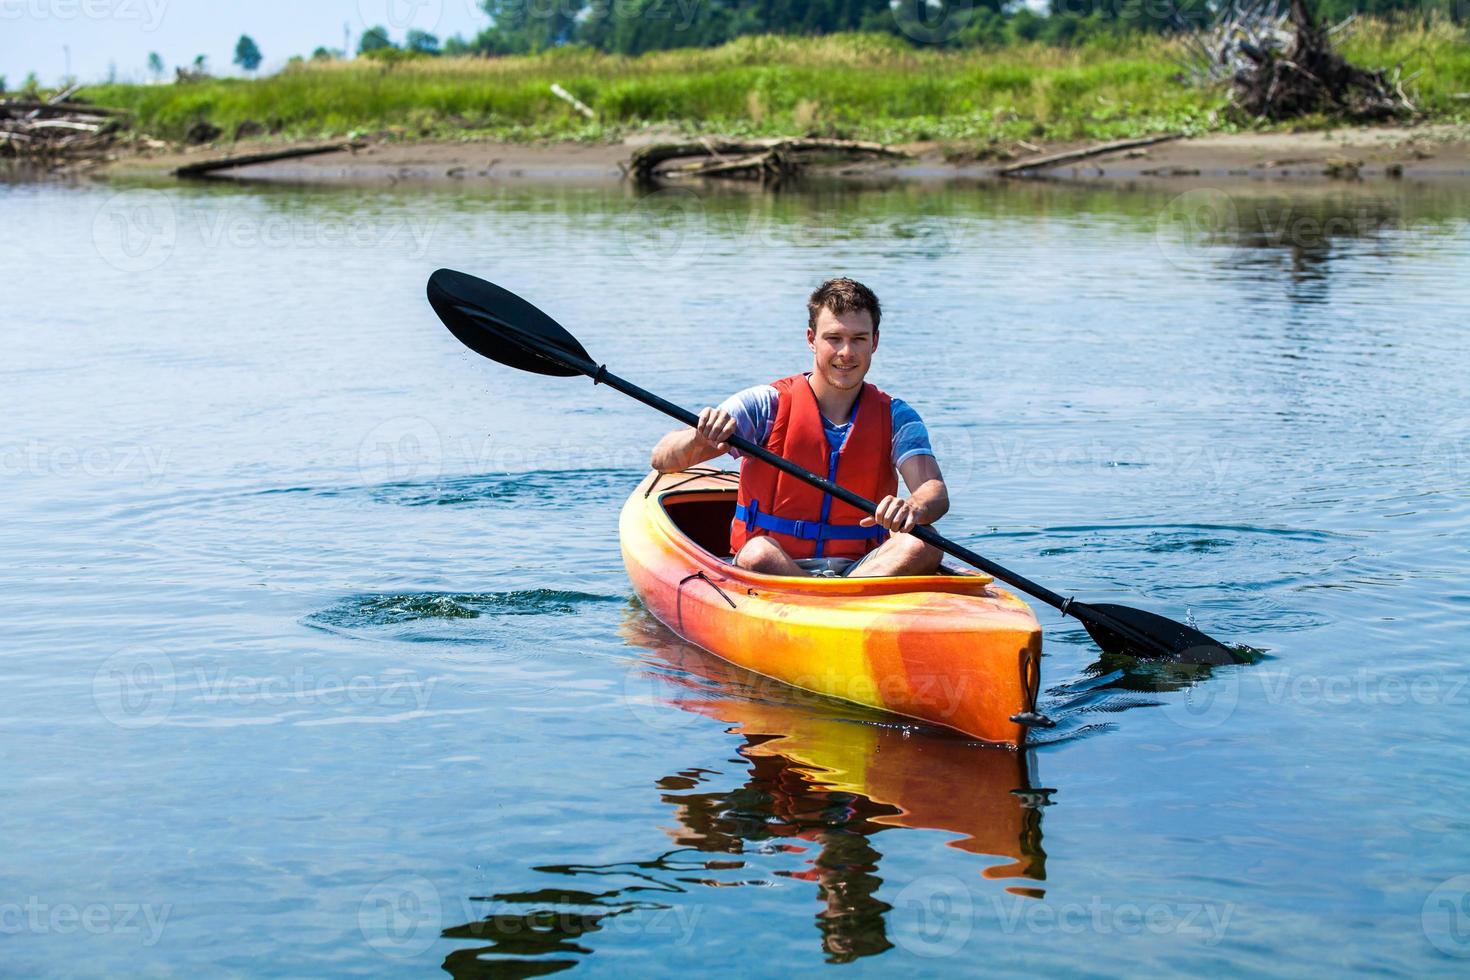 Man With Safety Vest Kayaking Alone on a Calm River photo